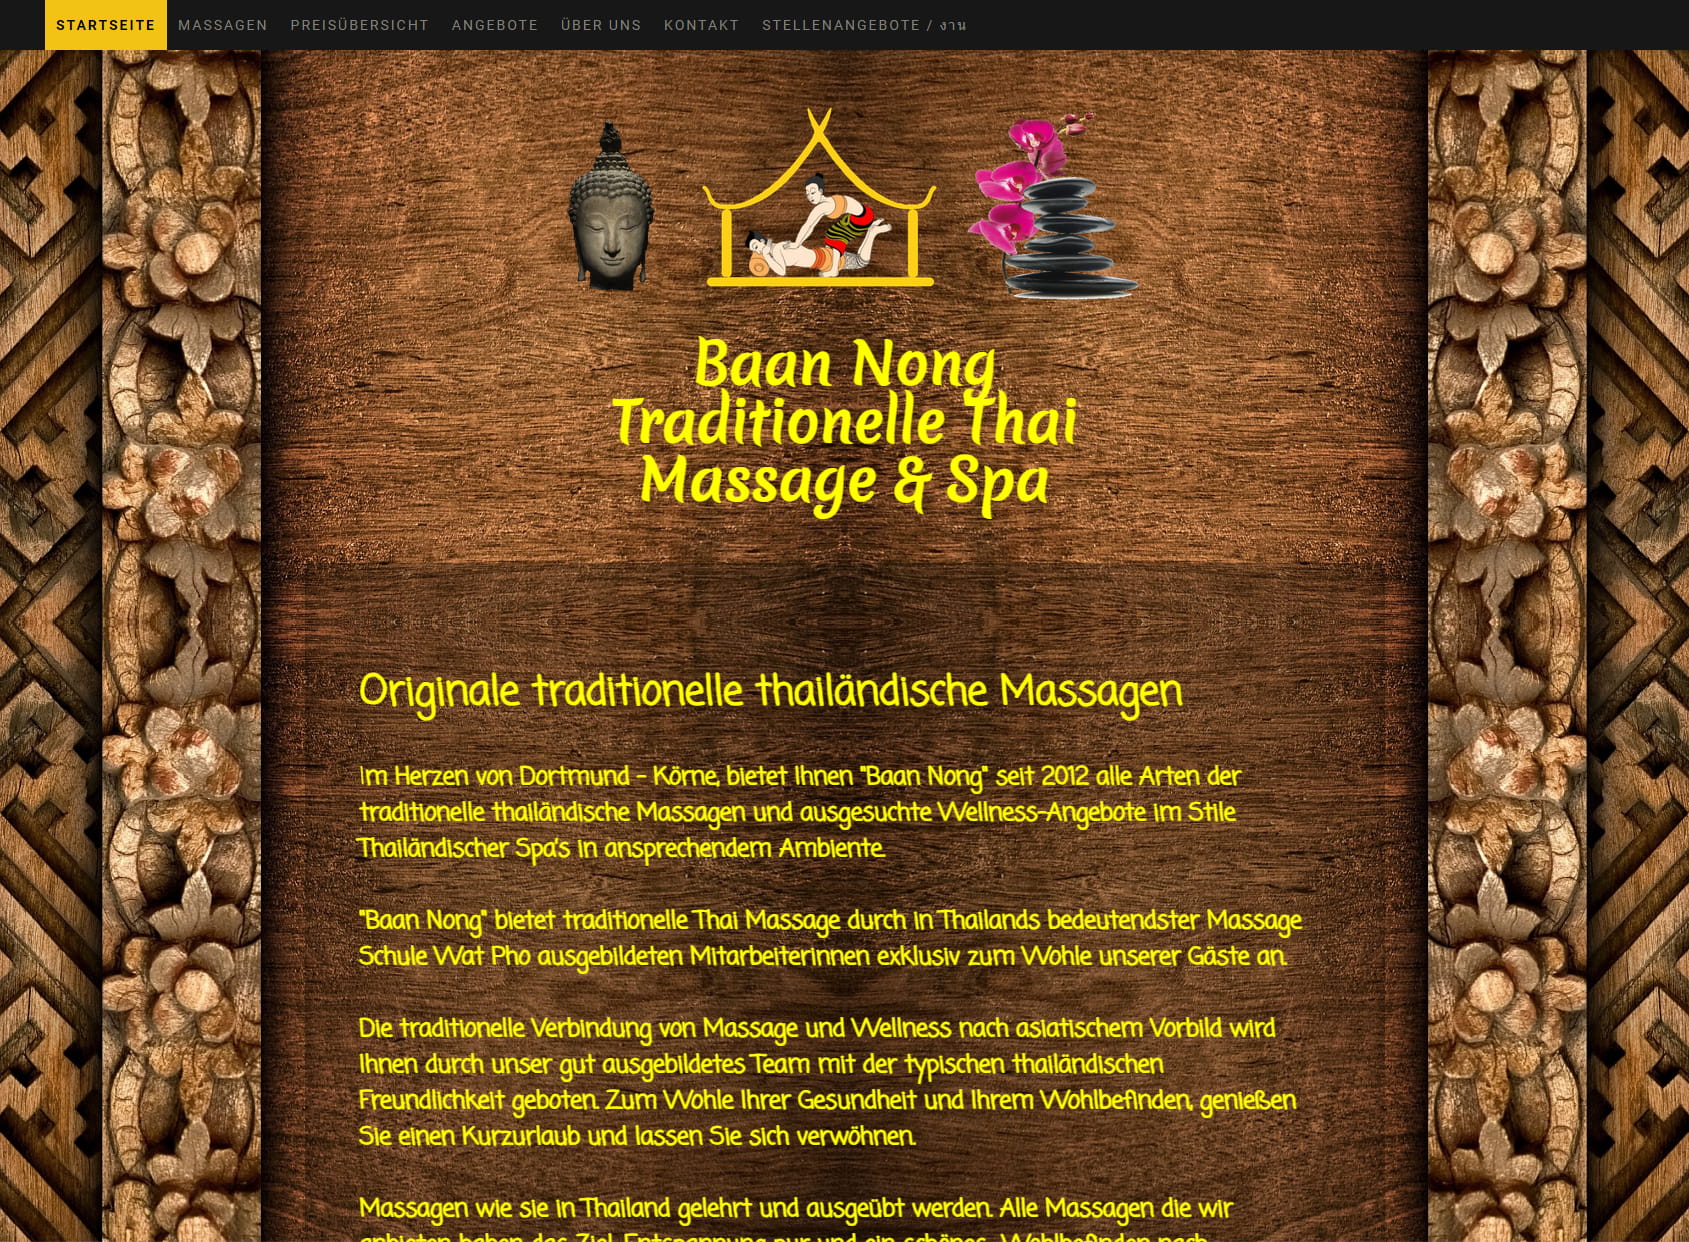 Baan Nong - Traditionelle Thai Massage & Spa